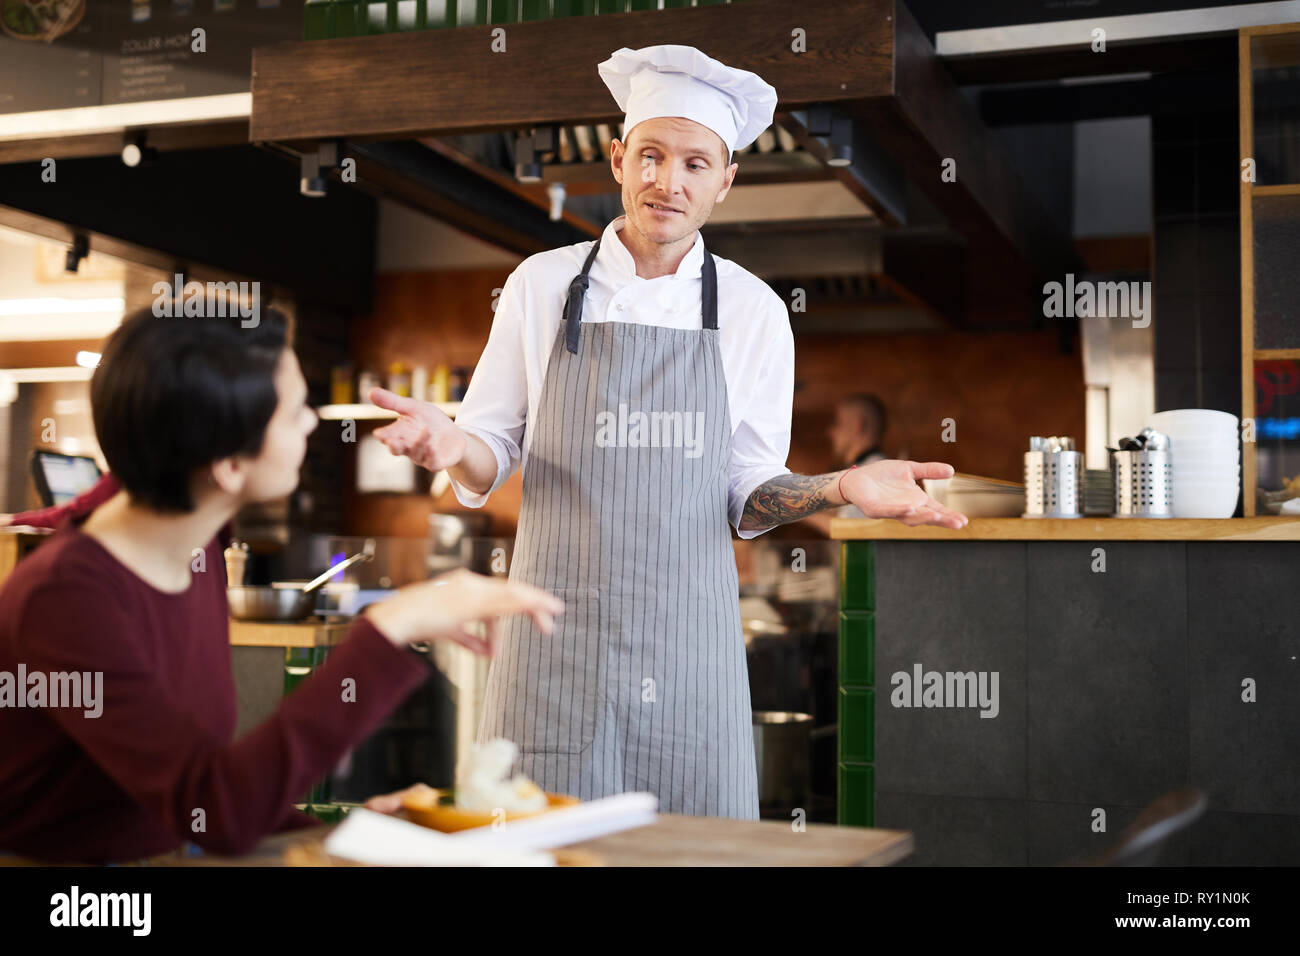 Client Complaining in Restaurant Stock Photo